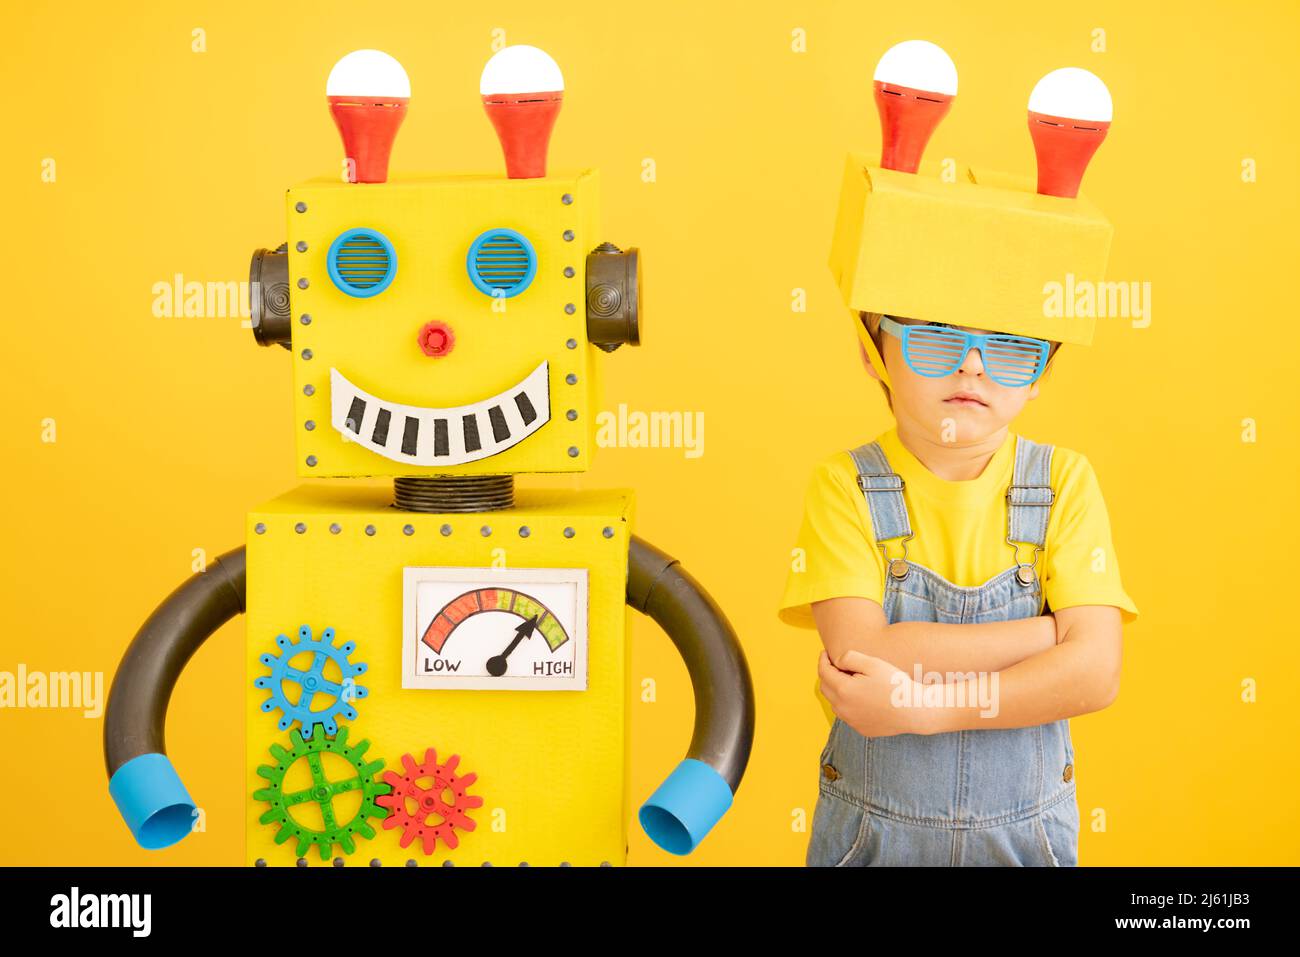 https://c8.alamy.com/comp/2J61JB3/happy-child-with-robot-against-yellow-background-funny-kid-playing-at-home-success-creative-and-innovation-technology-concept-2J61JB3.jpg